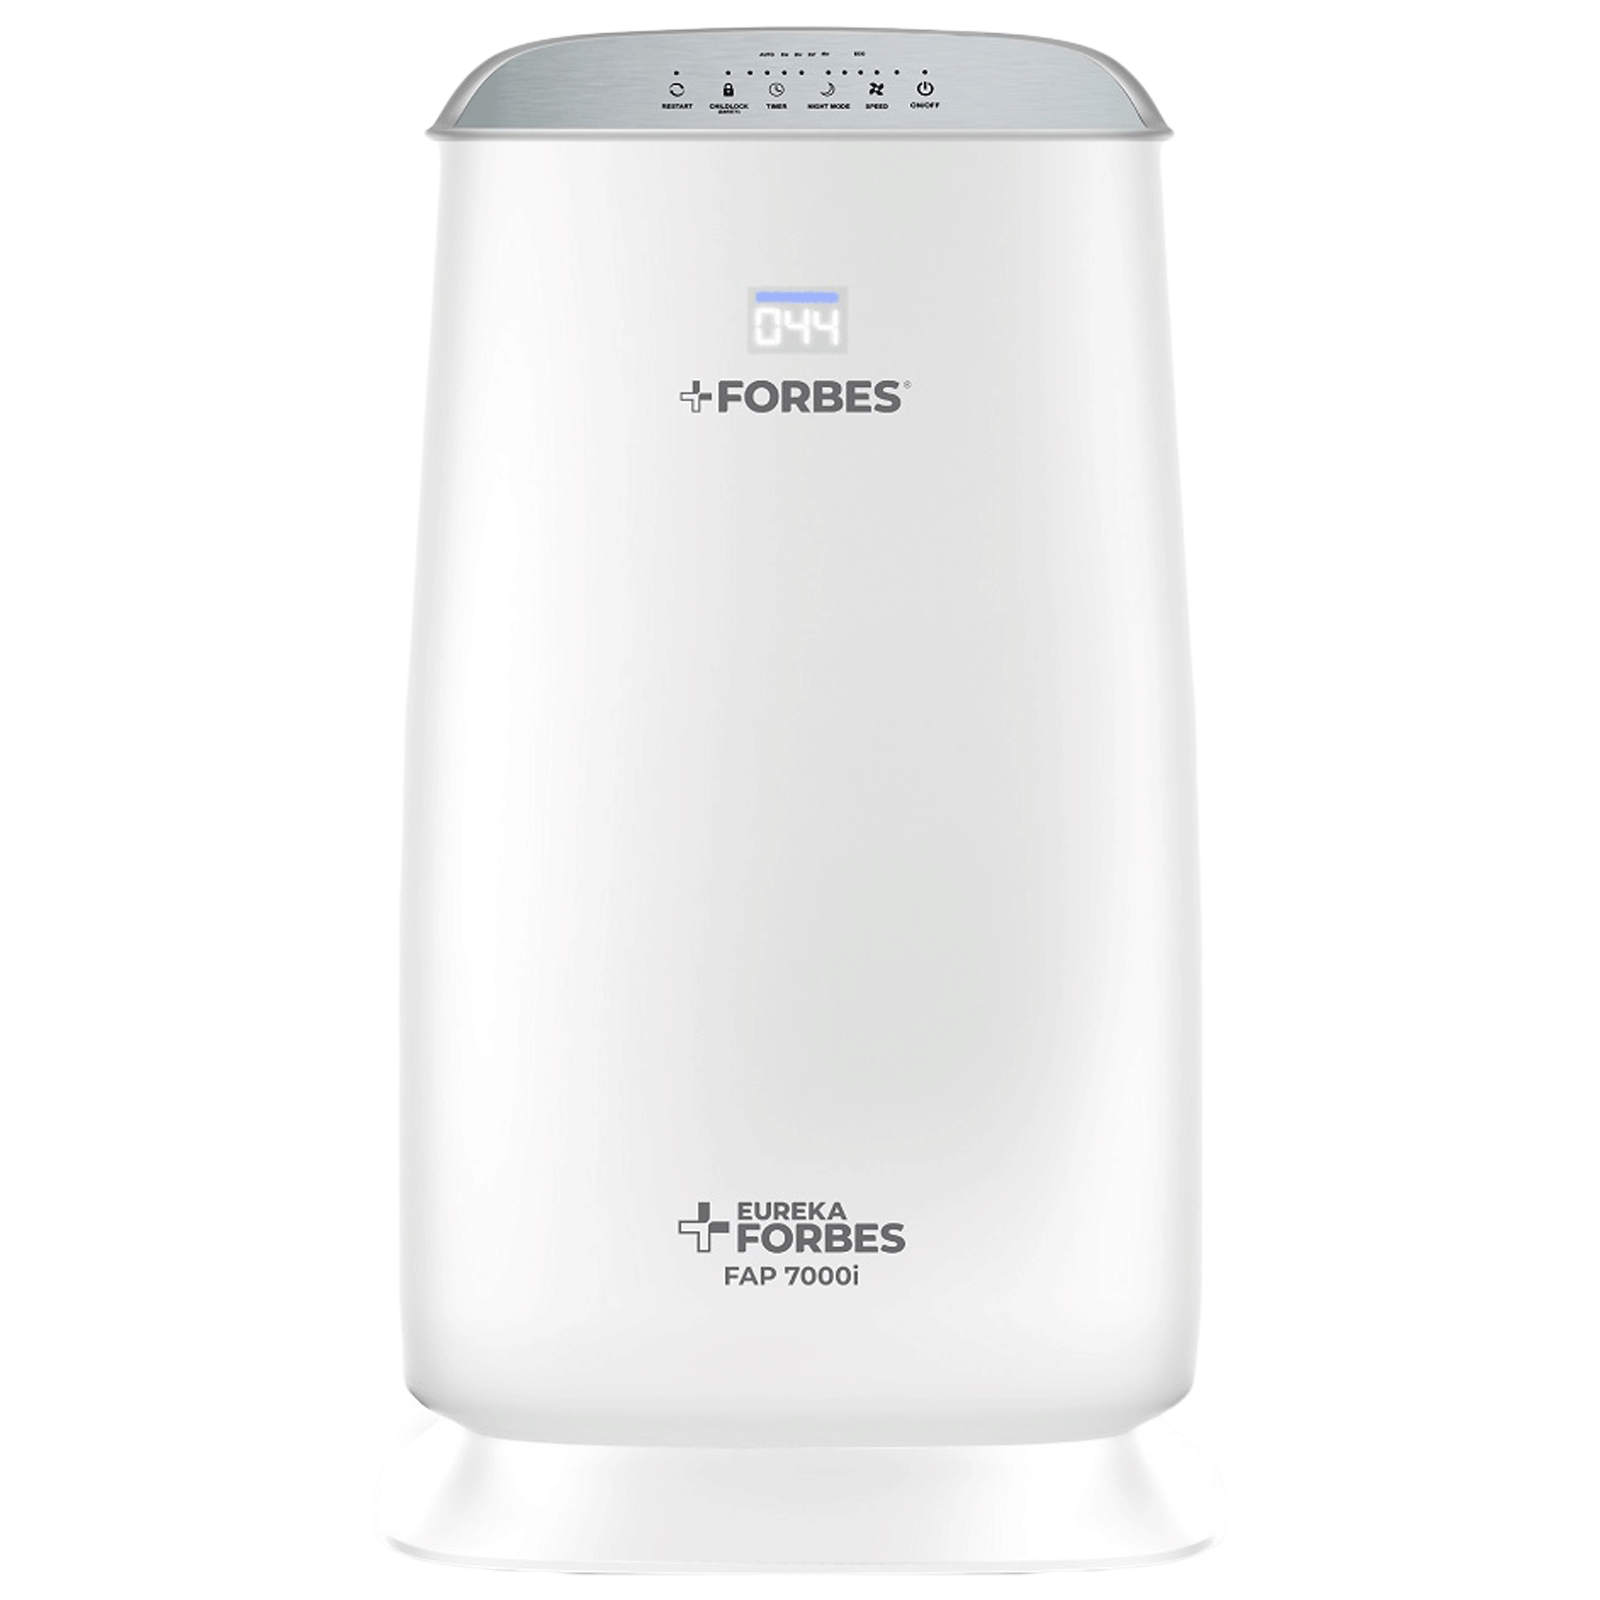 Eureka Forbes 4 Stages of Purification Technology Air Purifier (Advanced HEPA -11 Filters, FAP 7000i, White)_1